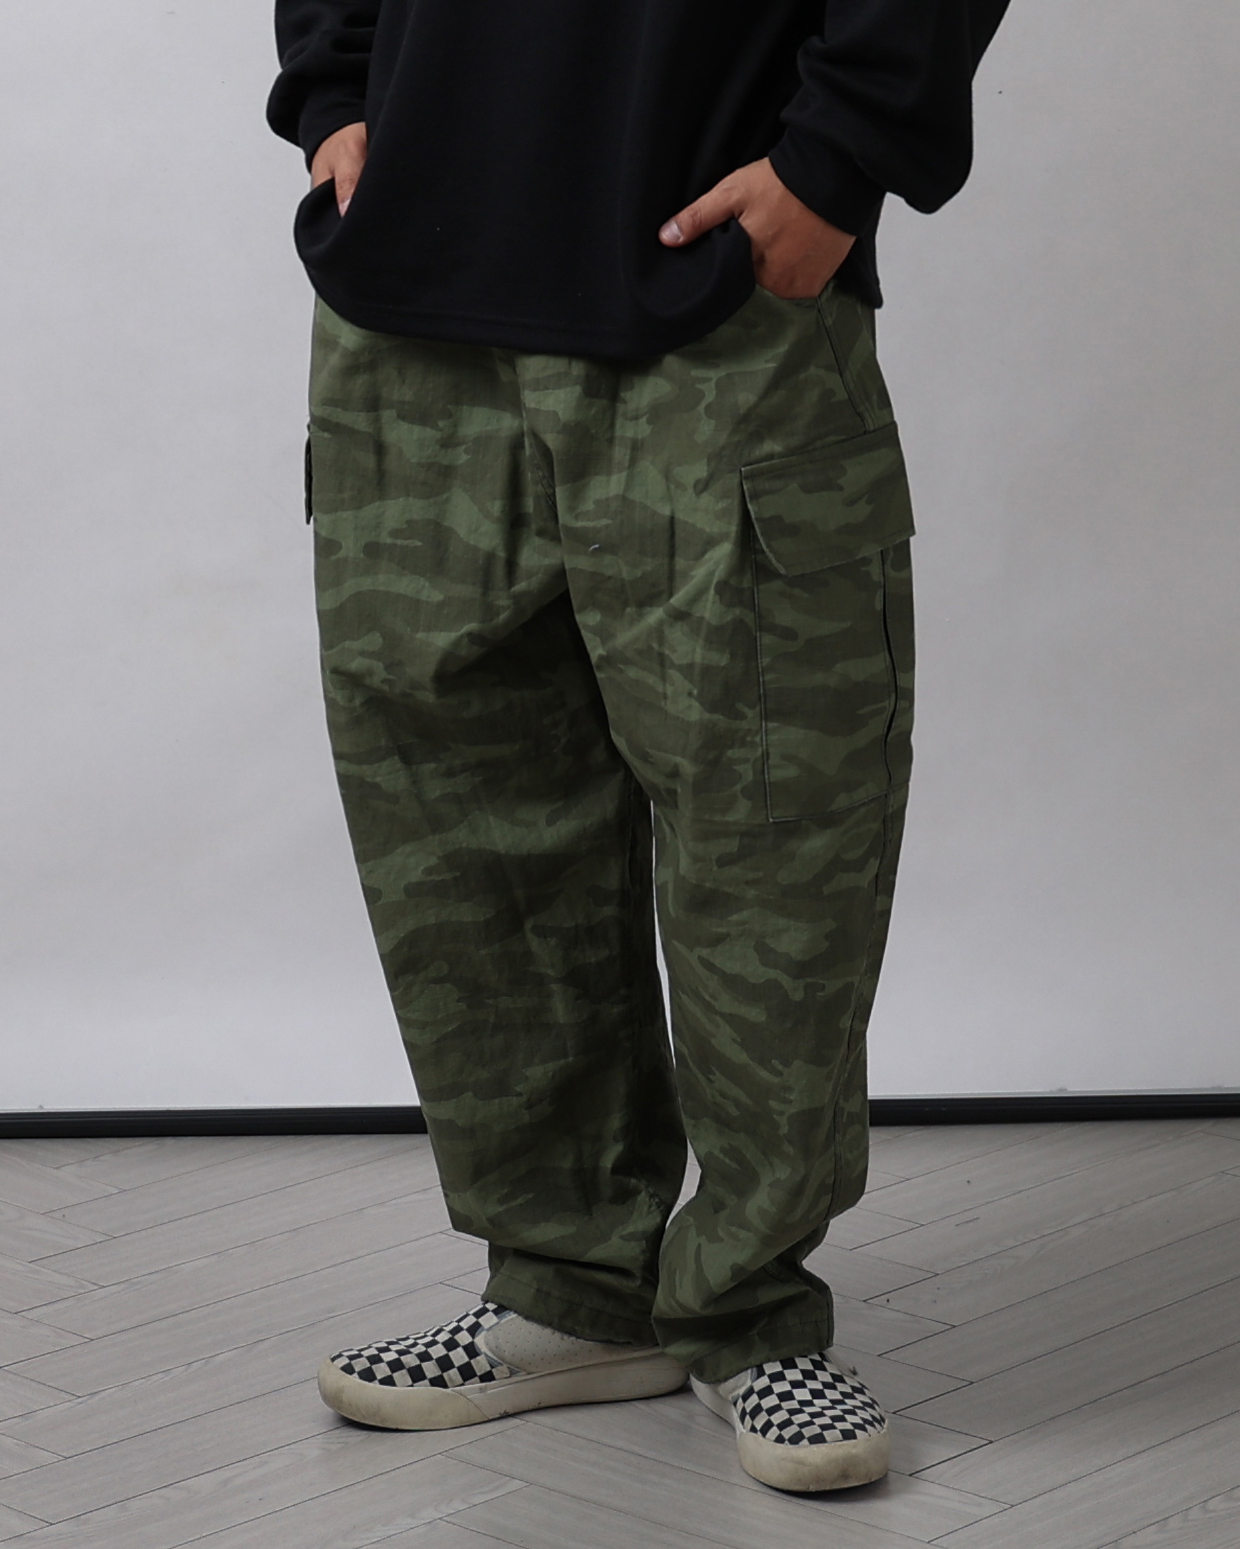 PERSNT Mil Camo Pattern Balloon Pants (Black/Olive/Beige)